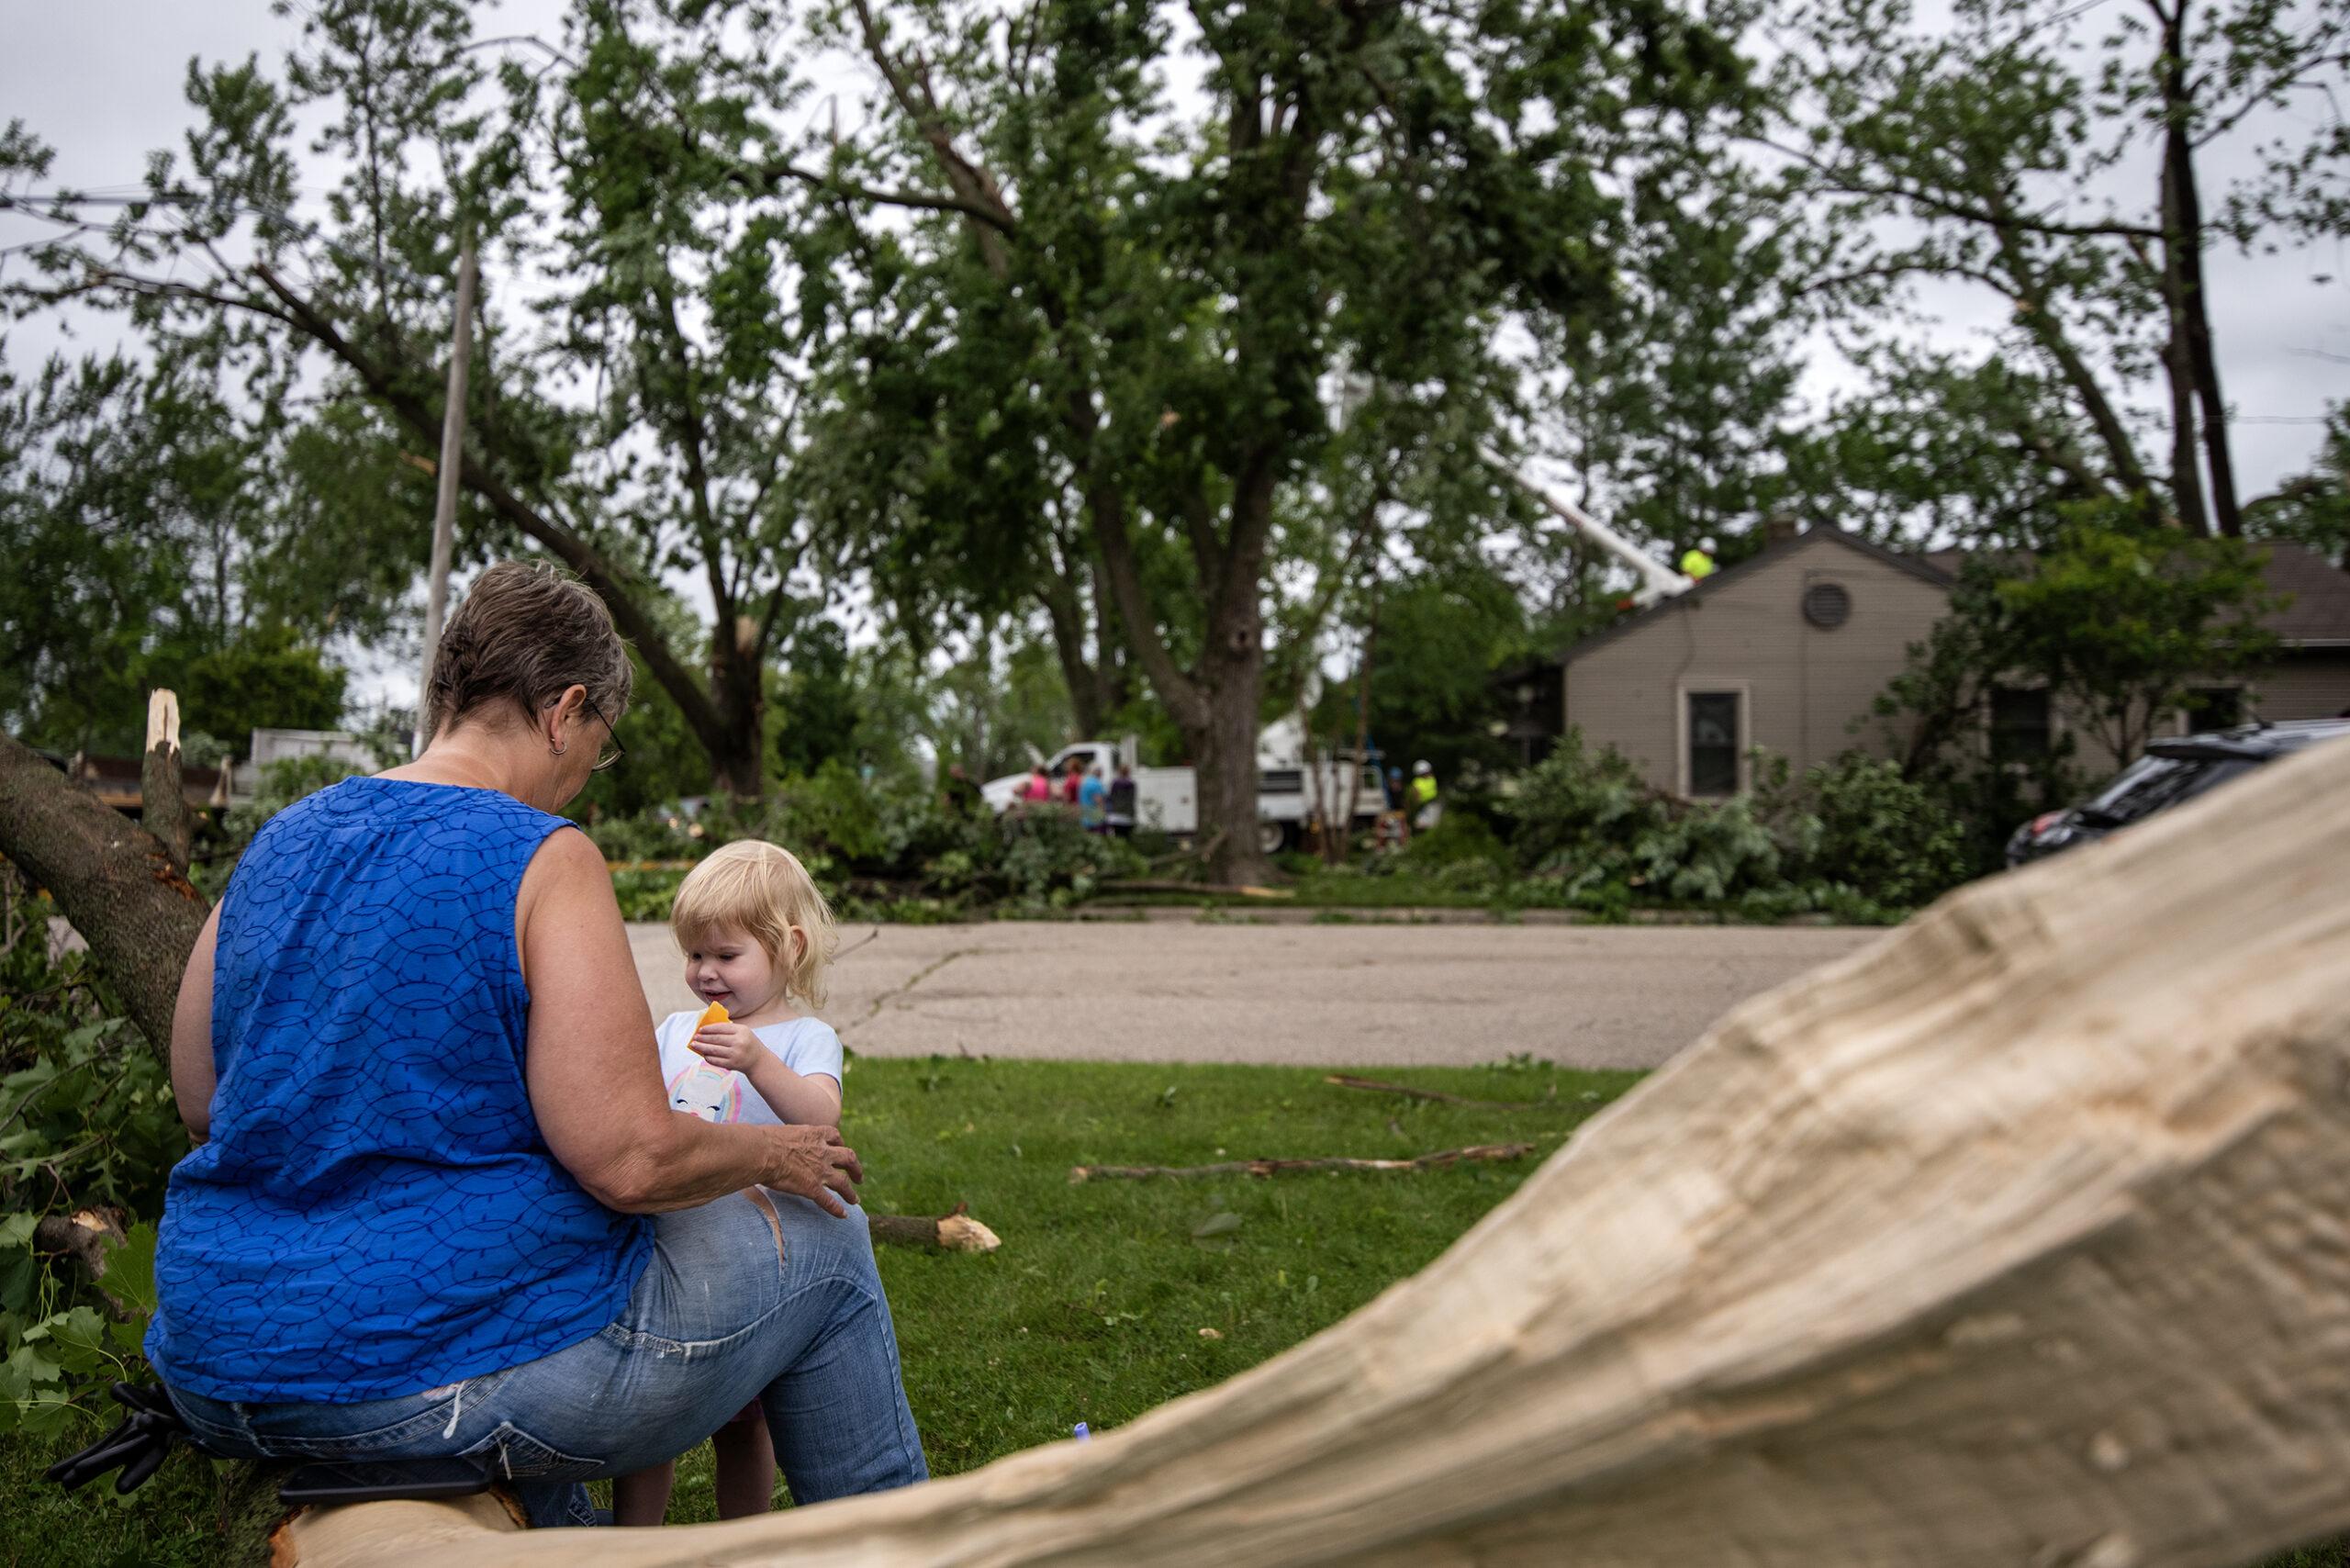 A woman and a chid sit together on a broken tree branch near storm damage.